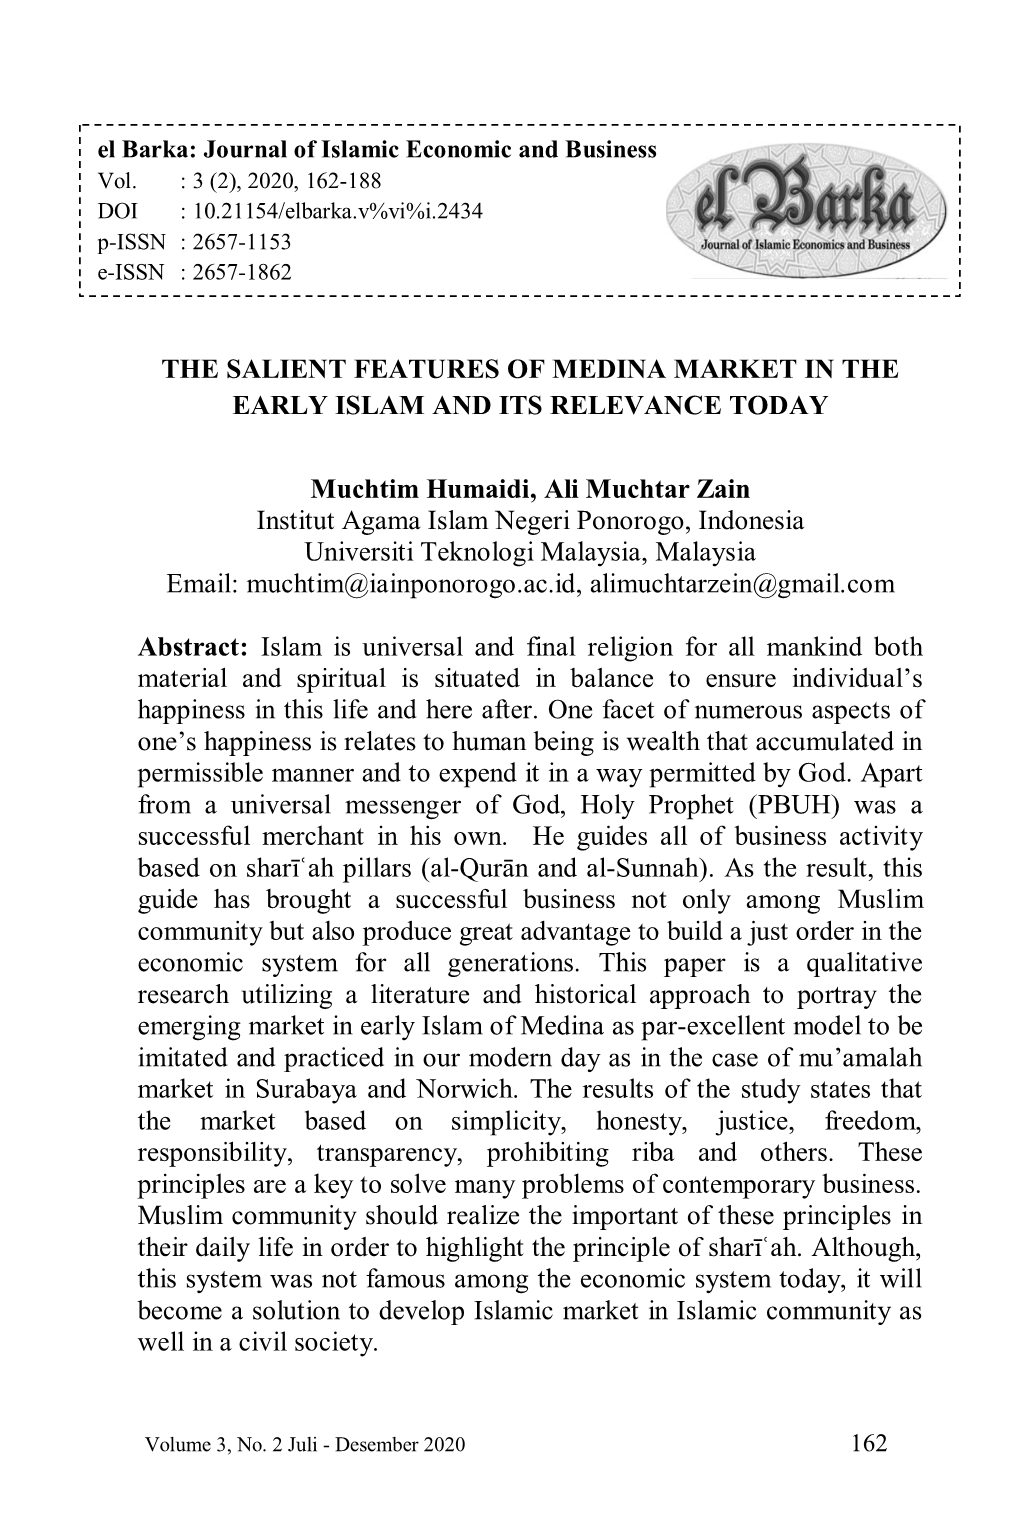 The Salient Features of Medina Market in the Early Islam and Its Relevance Today